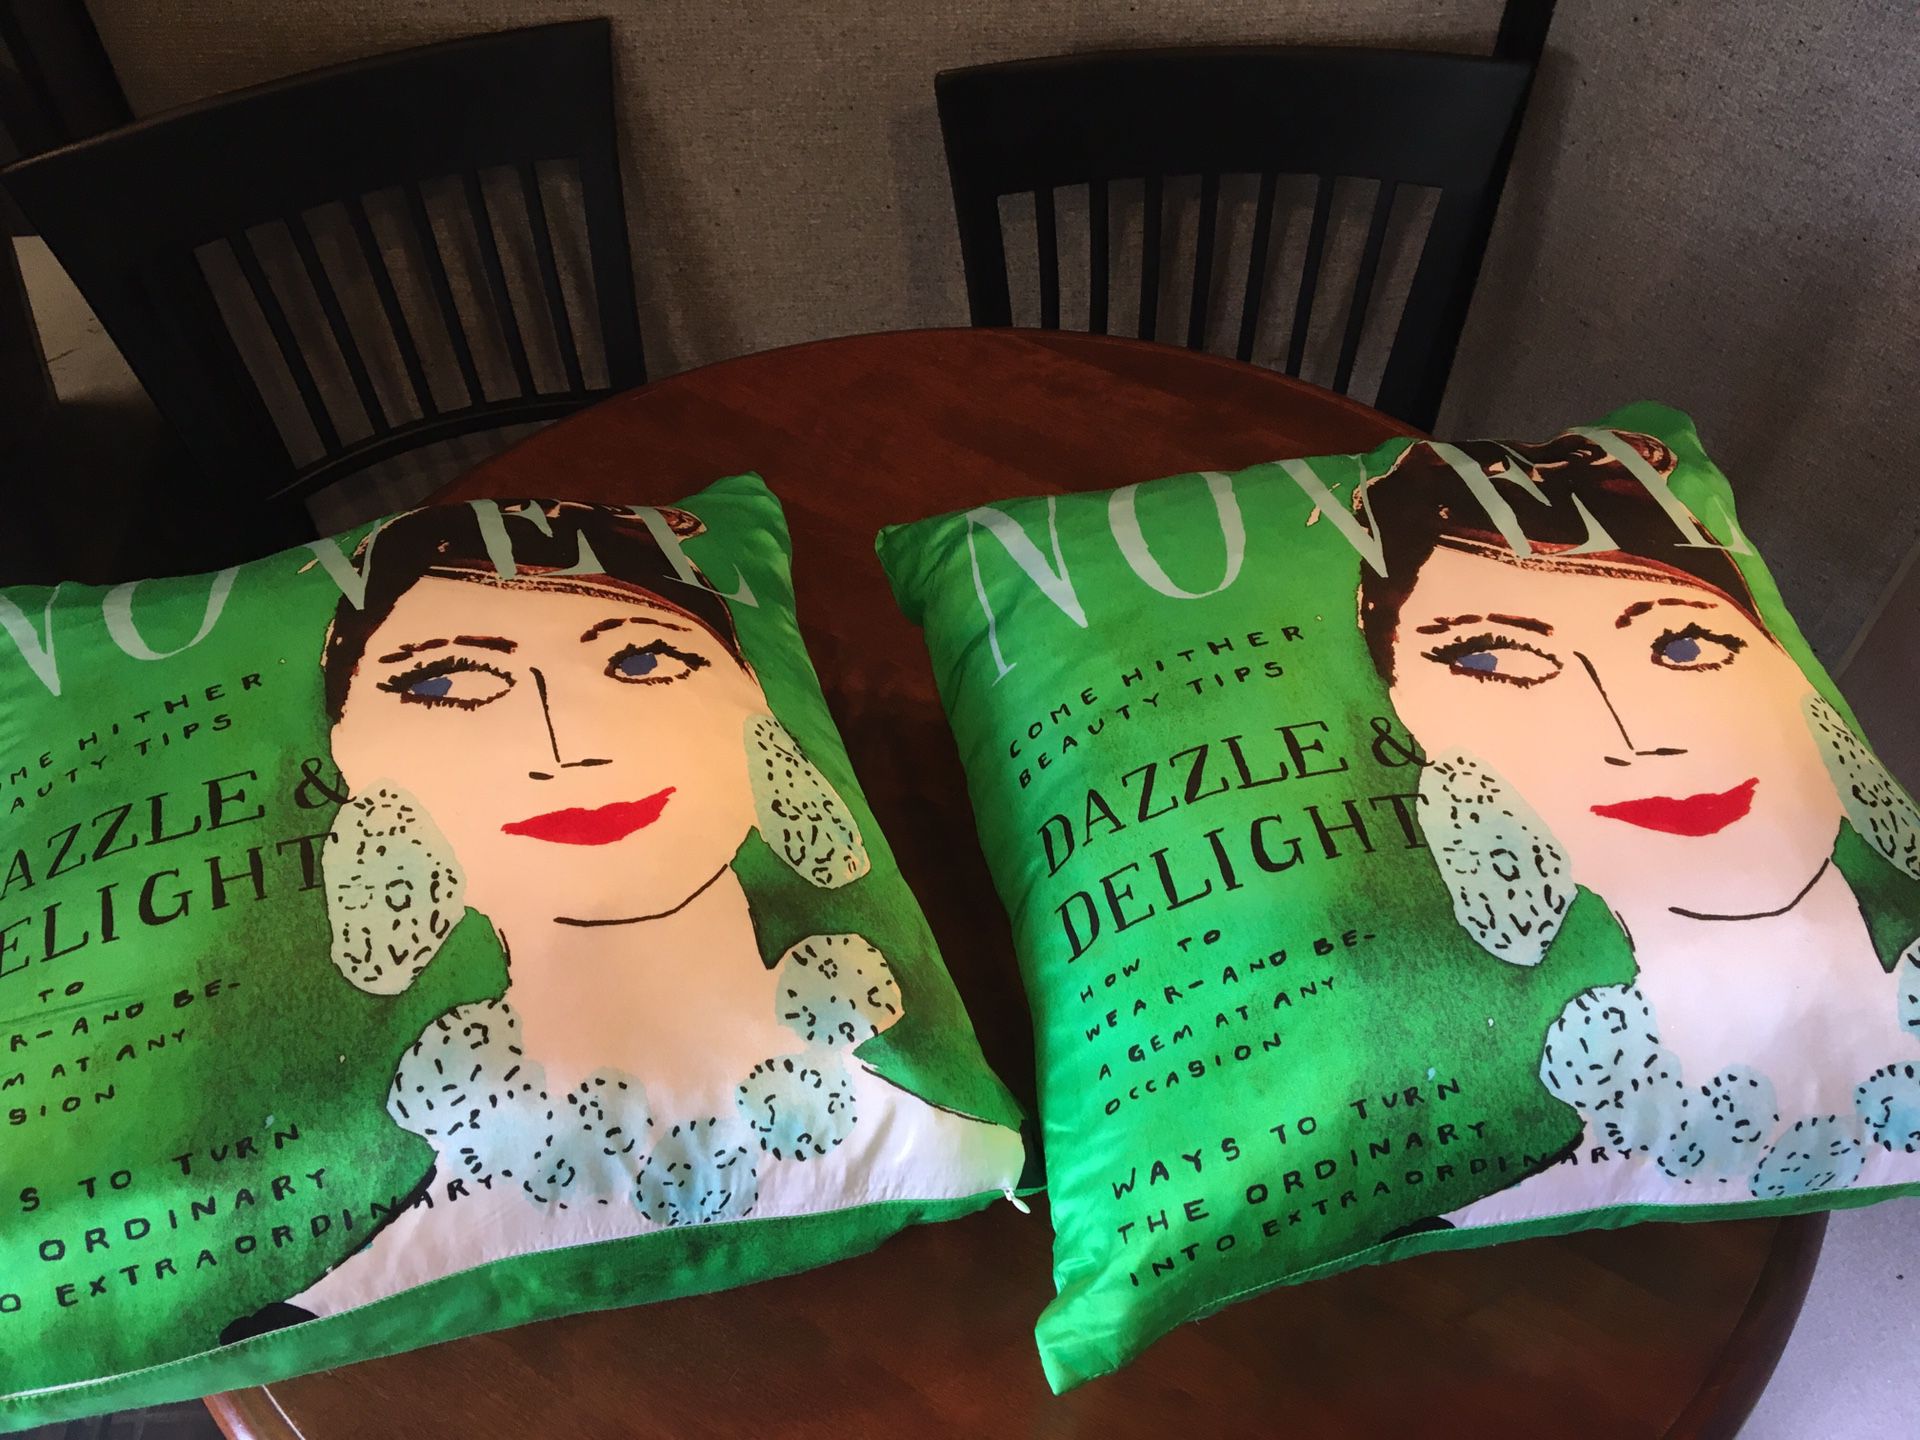 Two brand new Kate Spade pillows